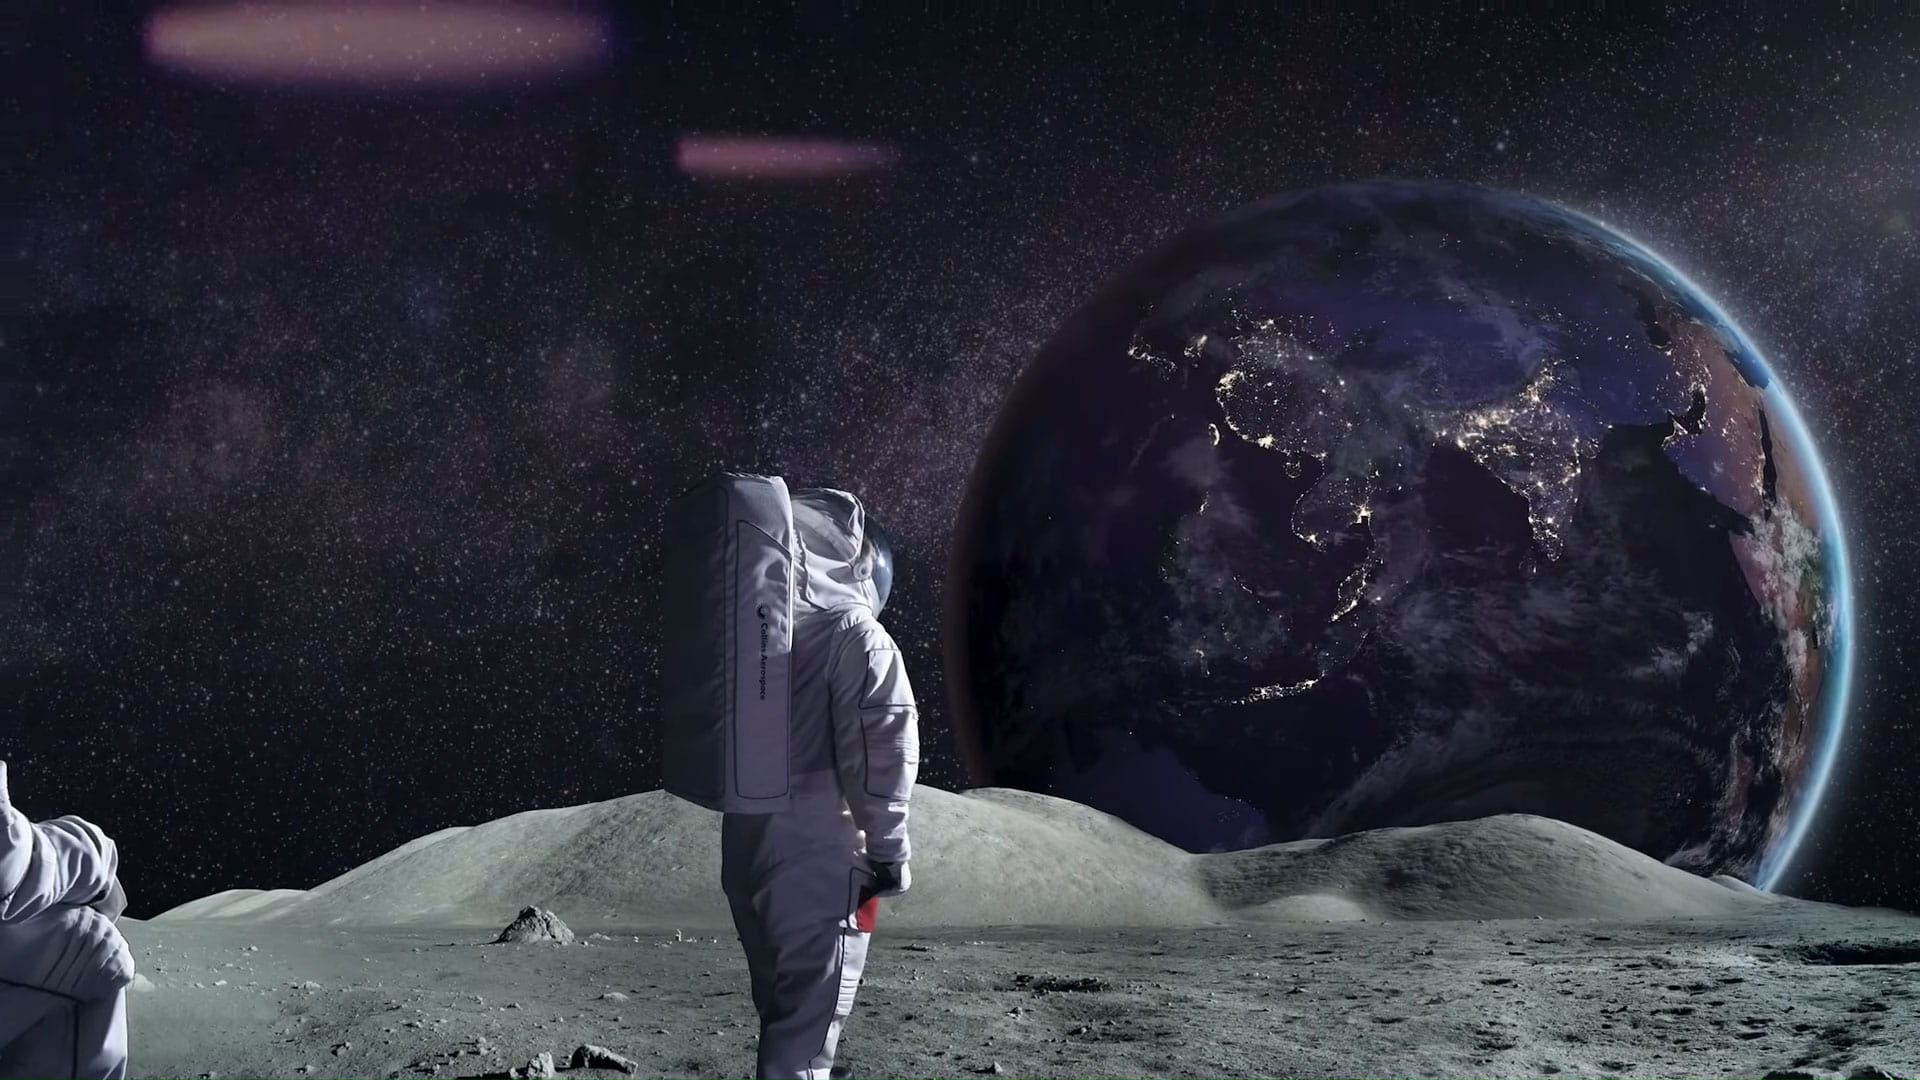 Artist rendering of an astronaut on the moon with Earth visible in the background